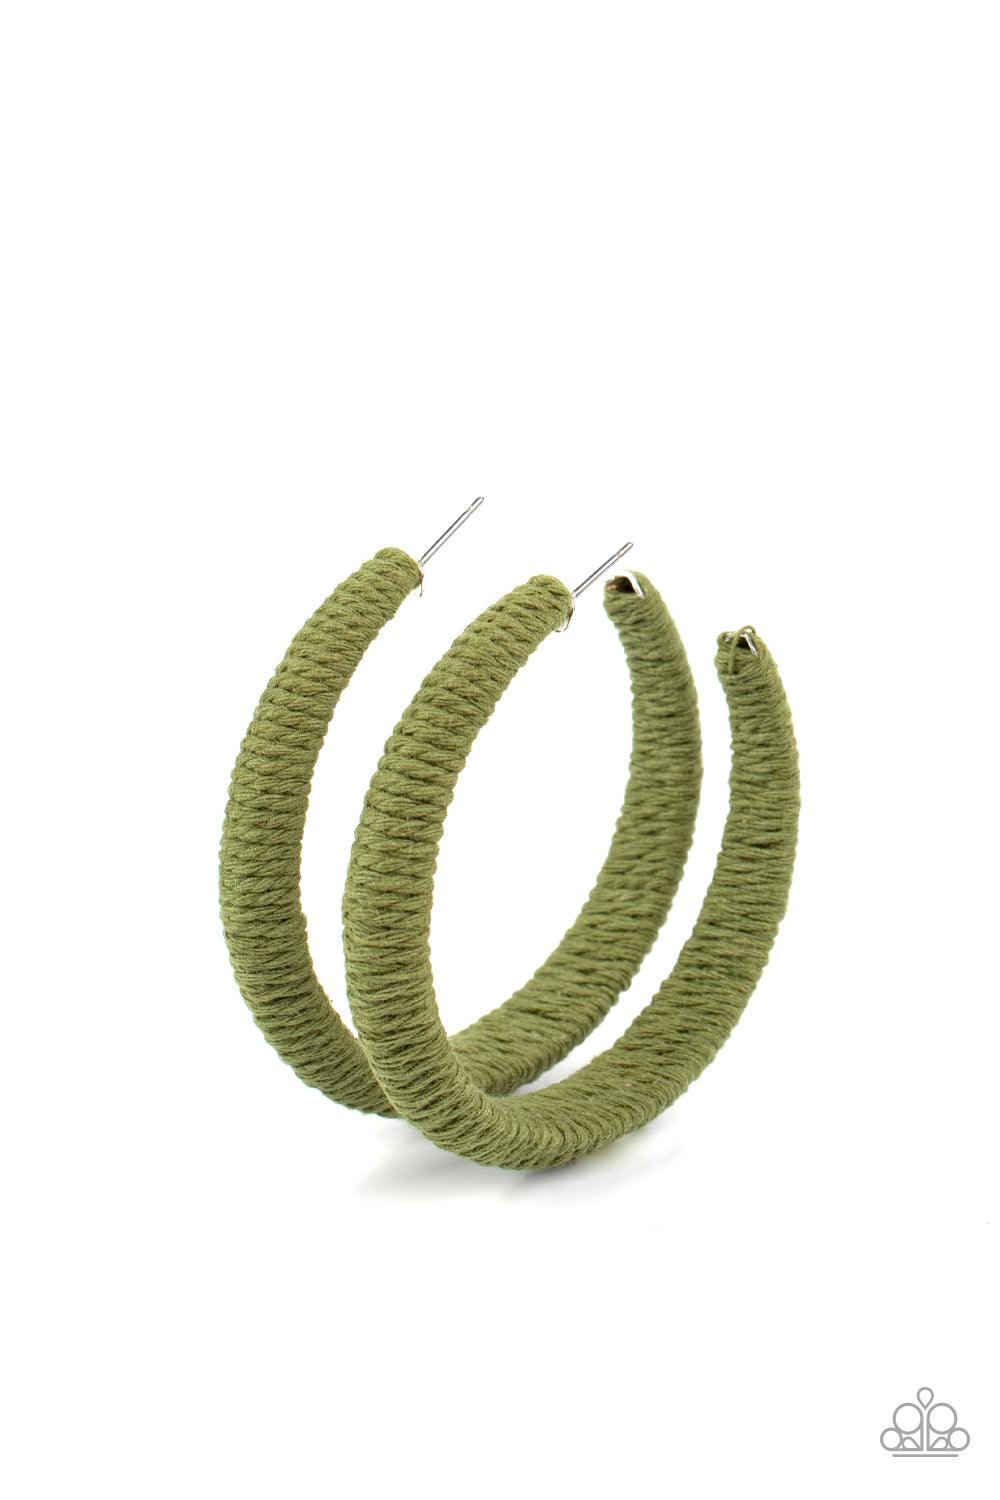 Paparazzi Accessories TWINE and Dine - Green Earthy Military Olive twine-like cording is wrapped around a thick hoop, creating a colorful rustic display. Earring attaches to a standard post fitting. Hoop measures approximately 2 1/4" in diameter. Sold as